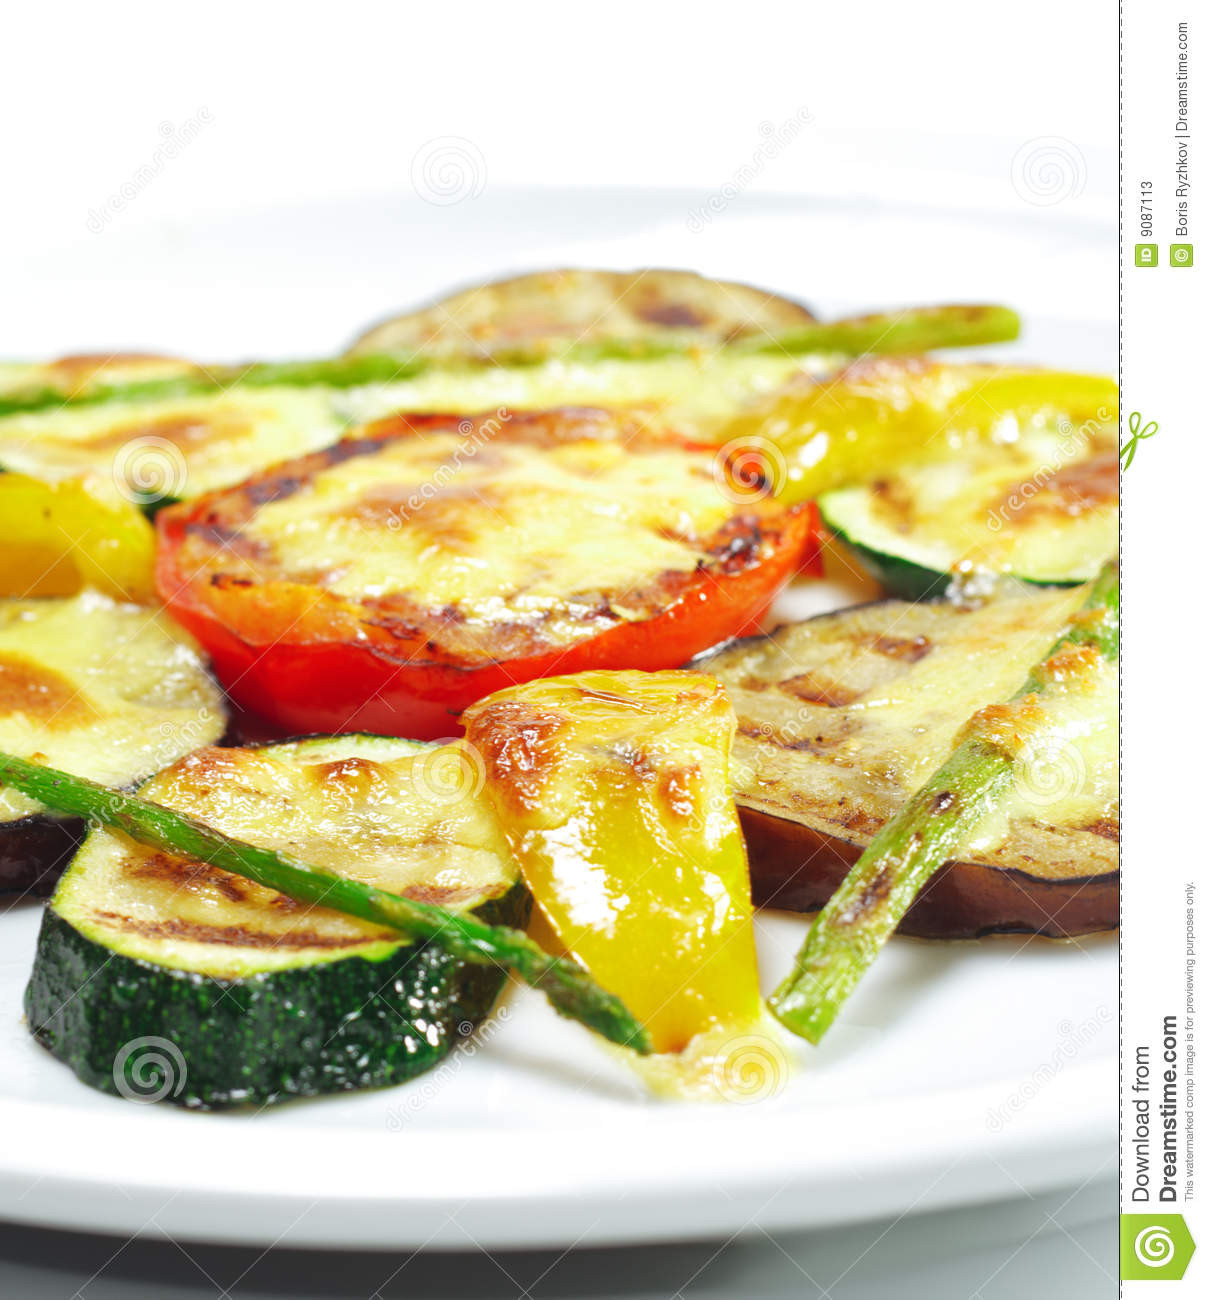 Vegetable Side Dishes For Bbq
 Side Dishes Grilled Ve ables Stock Image Image of